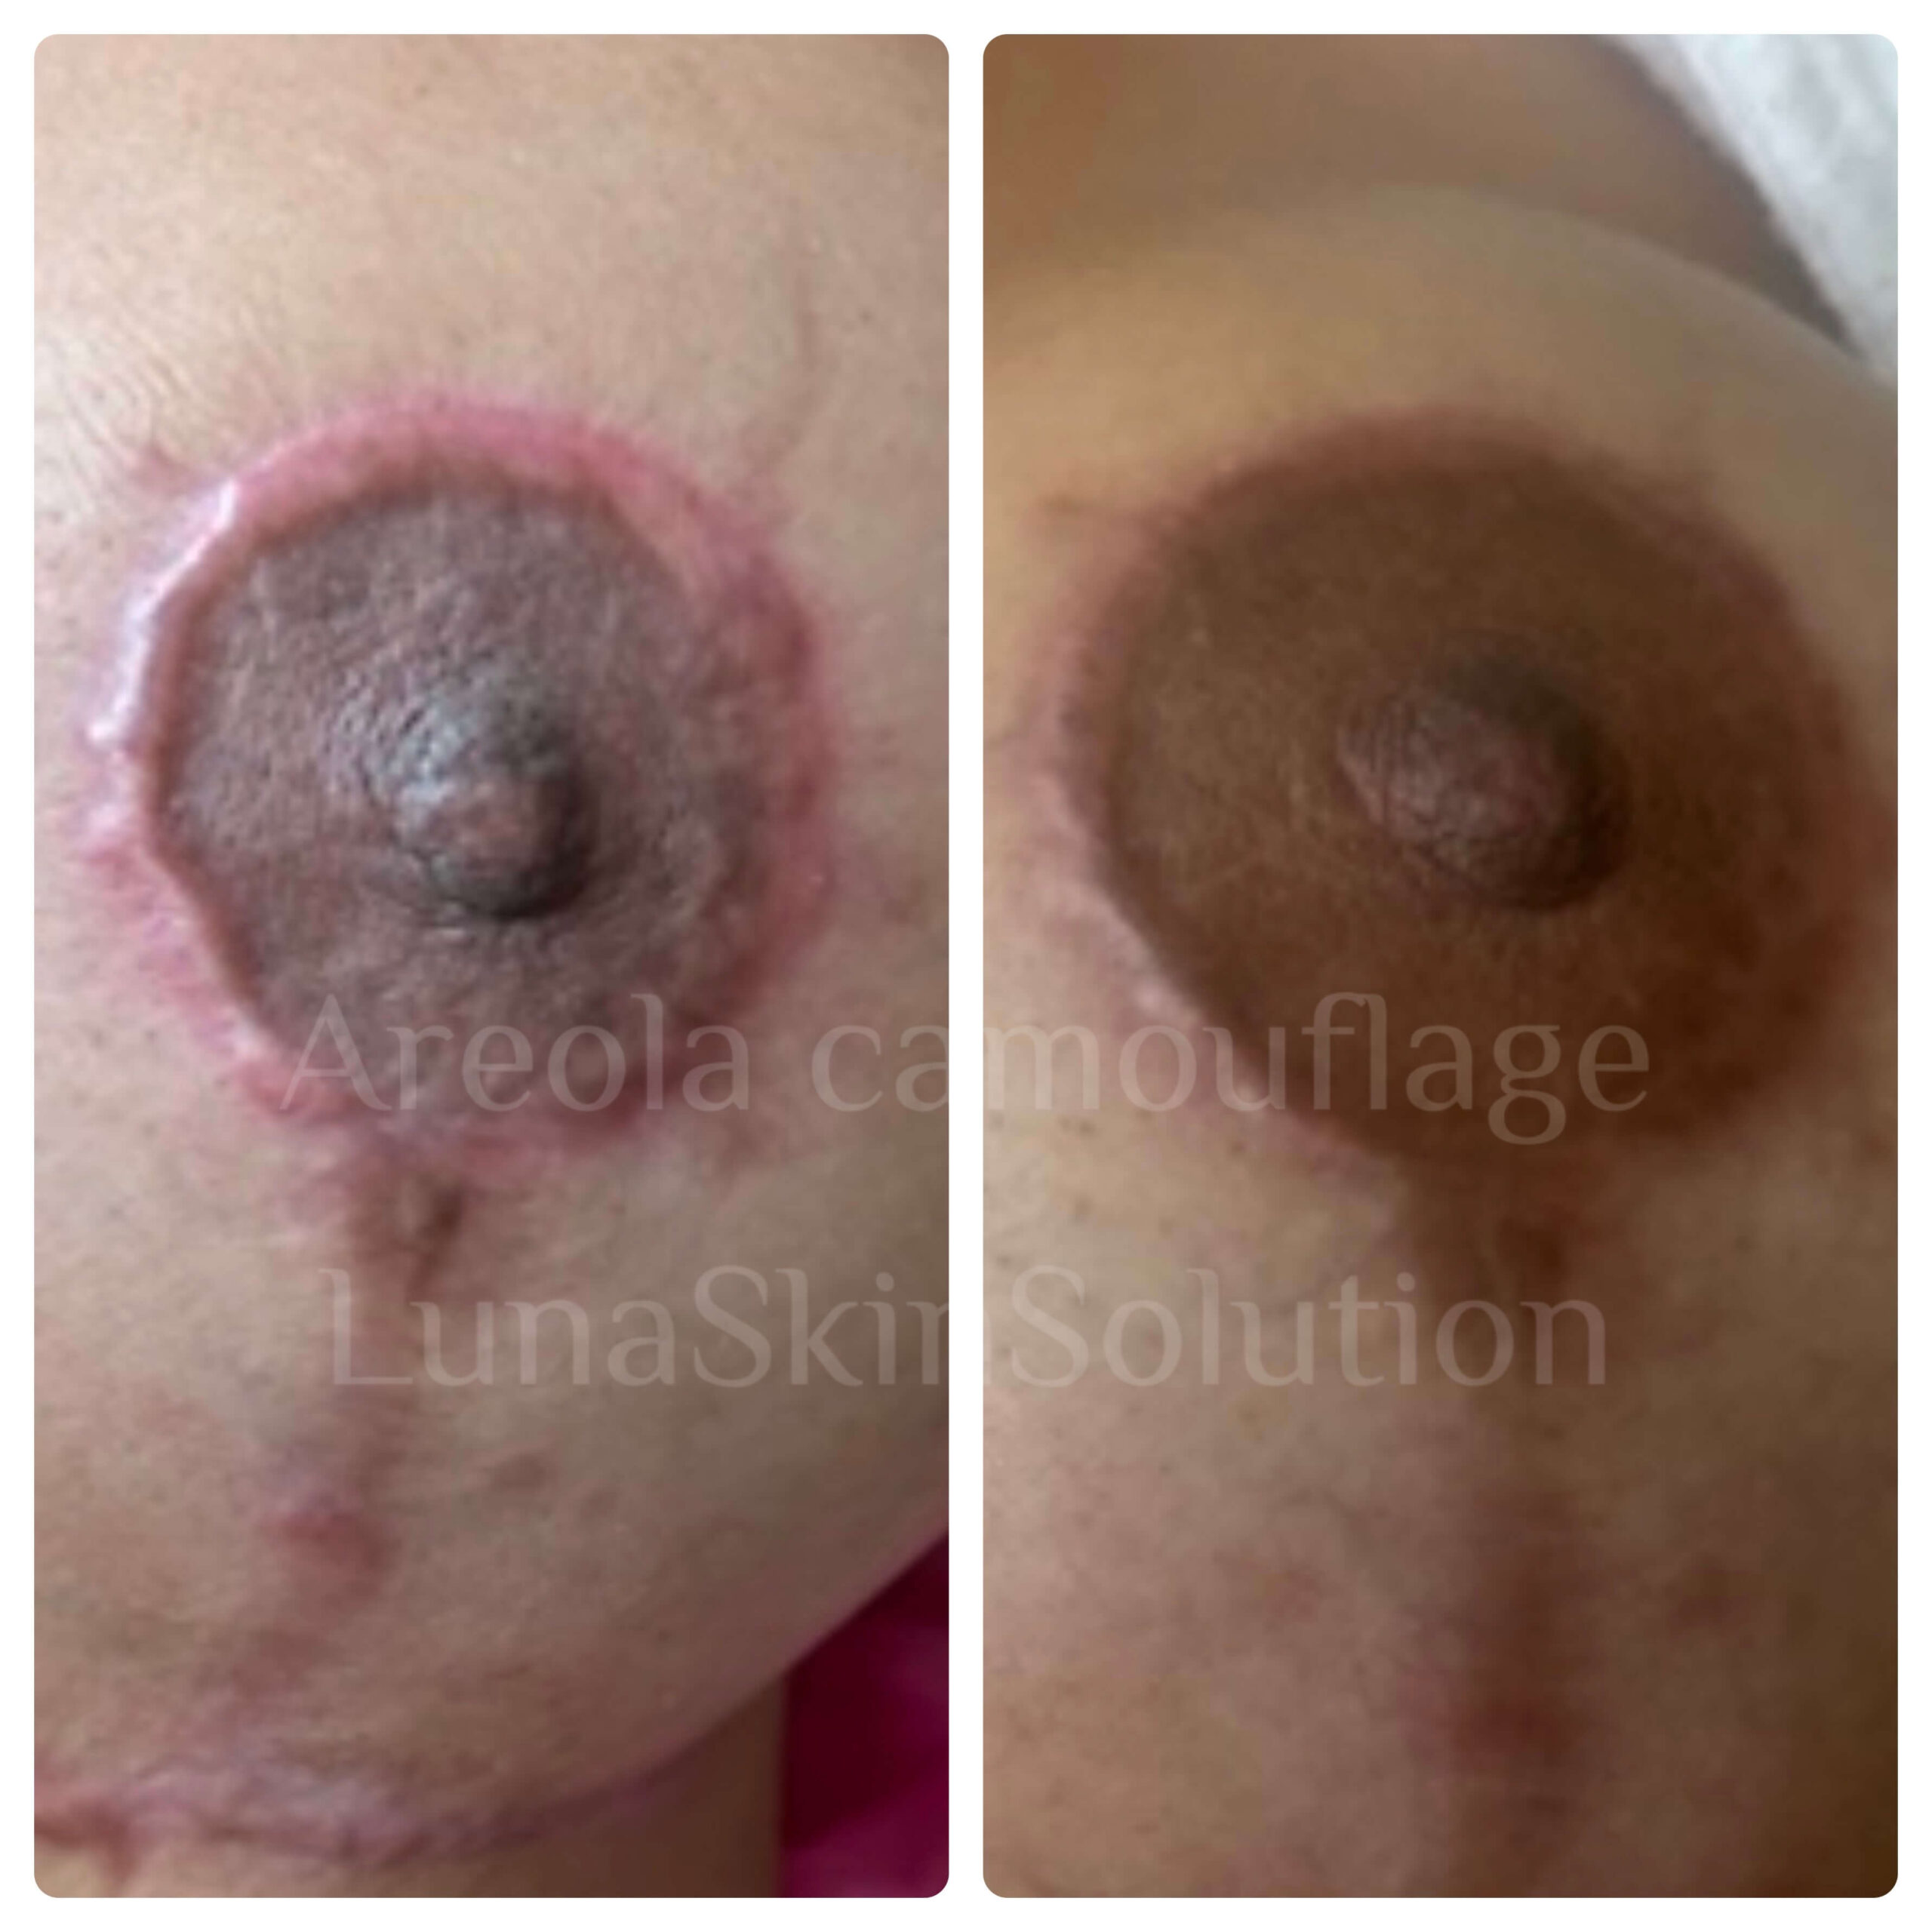 Areola camouflage and scar reduction